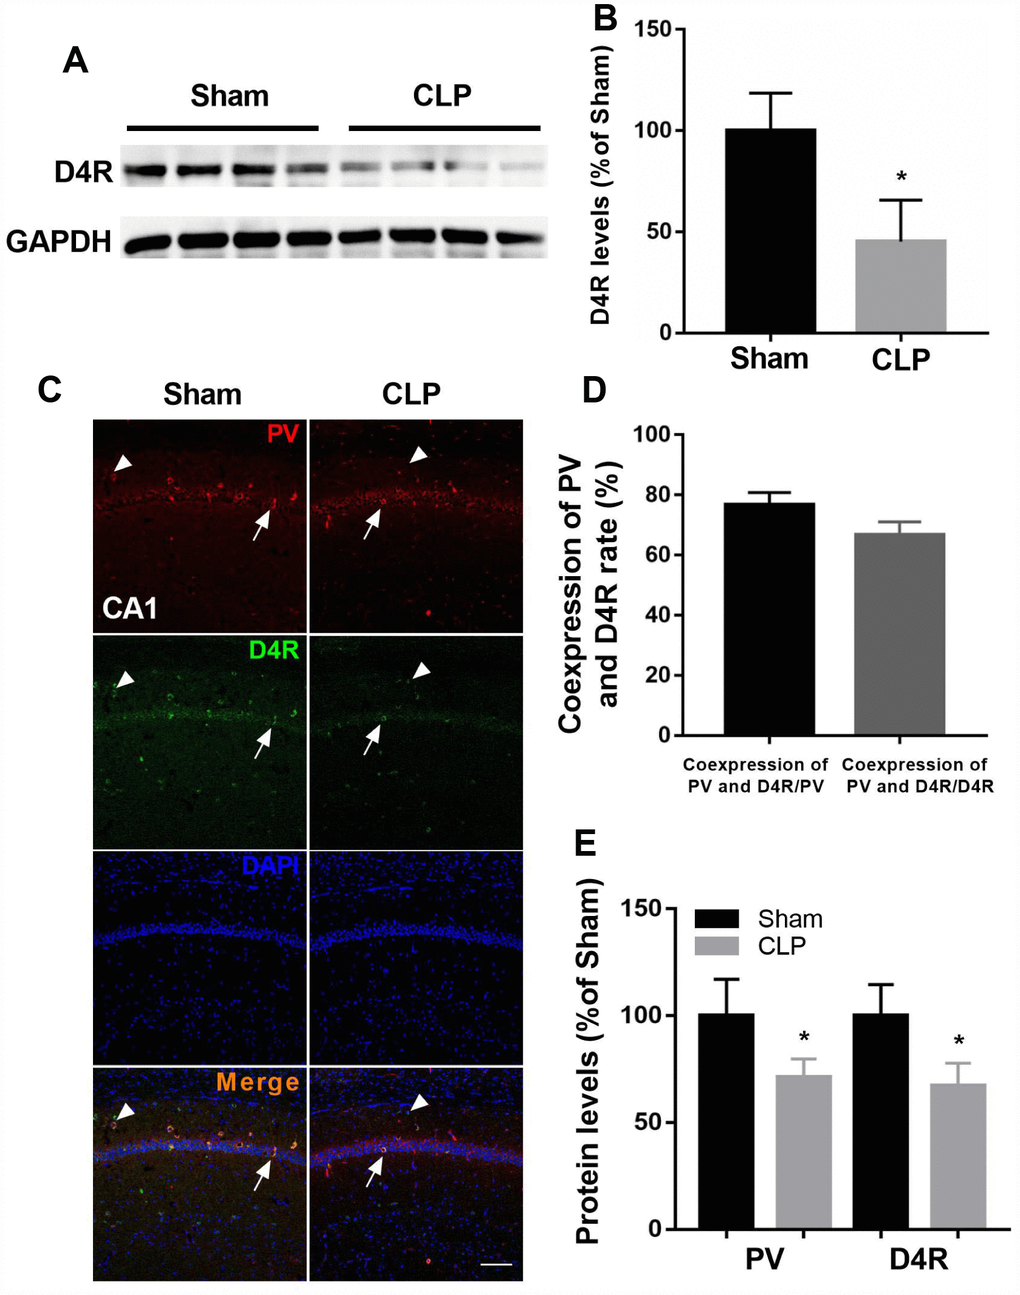 D4 receptor colocalizes in cells positive for PV and was decreased after CLP. (A–B) D4 receptor was significantly decreased after CLP. (C–D) Most PV interneurons co-express D4 receptor and a large proportion of D4 receptor-expressing neurons in the hippocampus co-express PV. Arrow: coexpress D4 receptor and PV; Arrowhead: express D4 receptor without parvalbumin. (C and E) Decreased PV and D4 expressions were observed after CLP when compared with sham + NS group. *P 